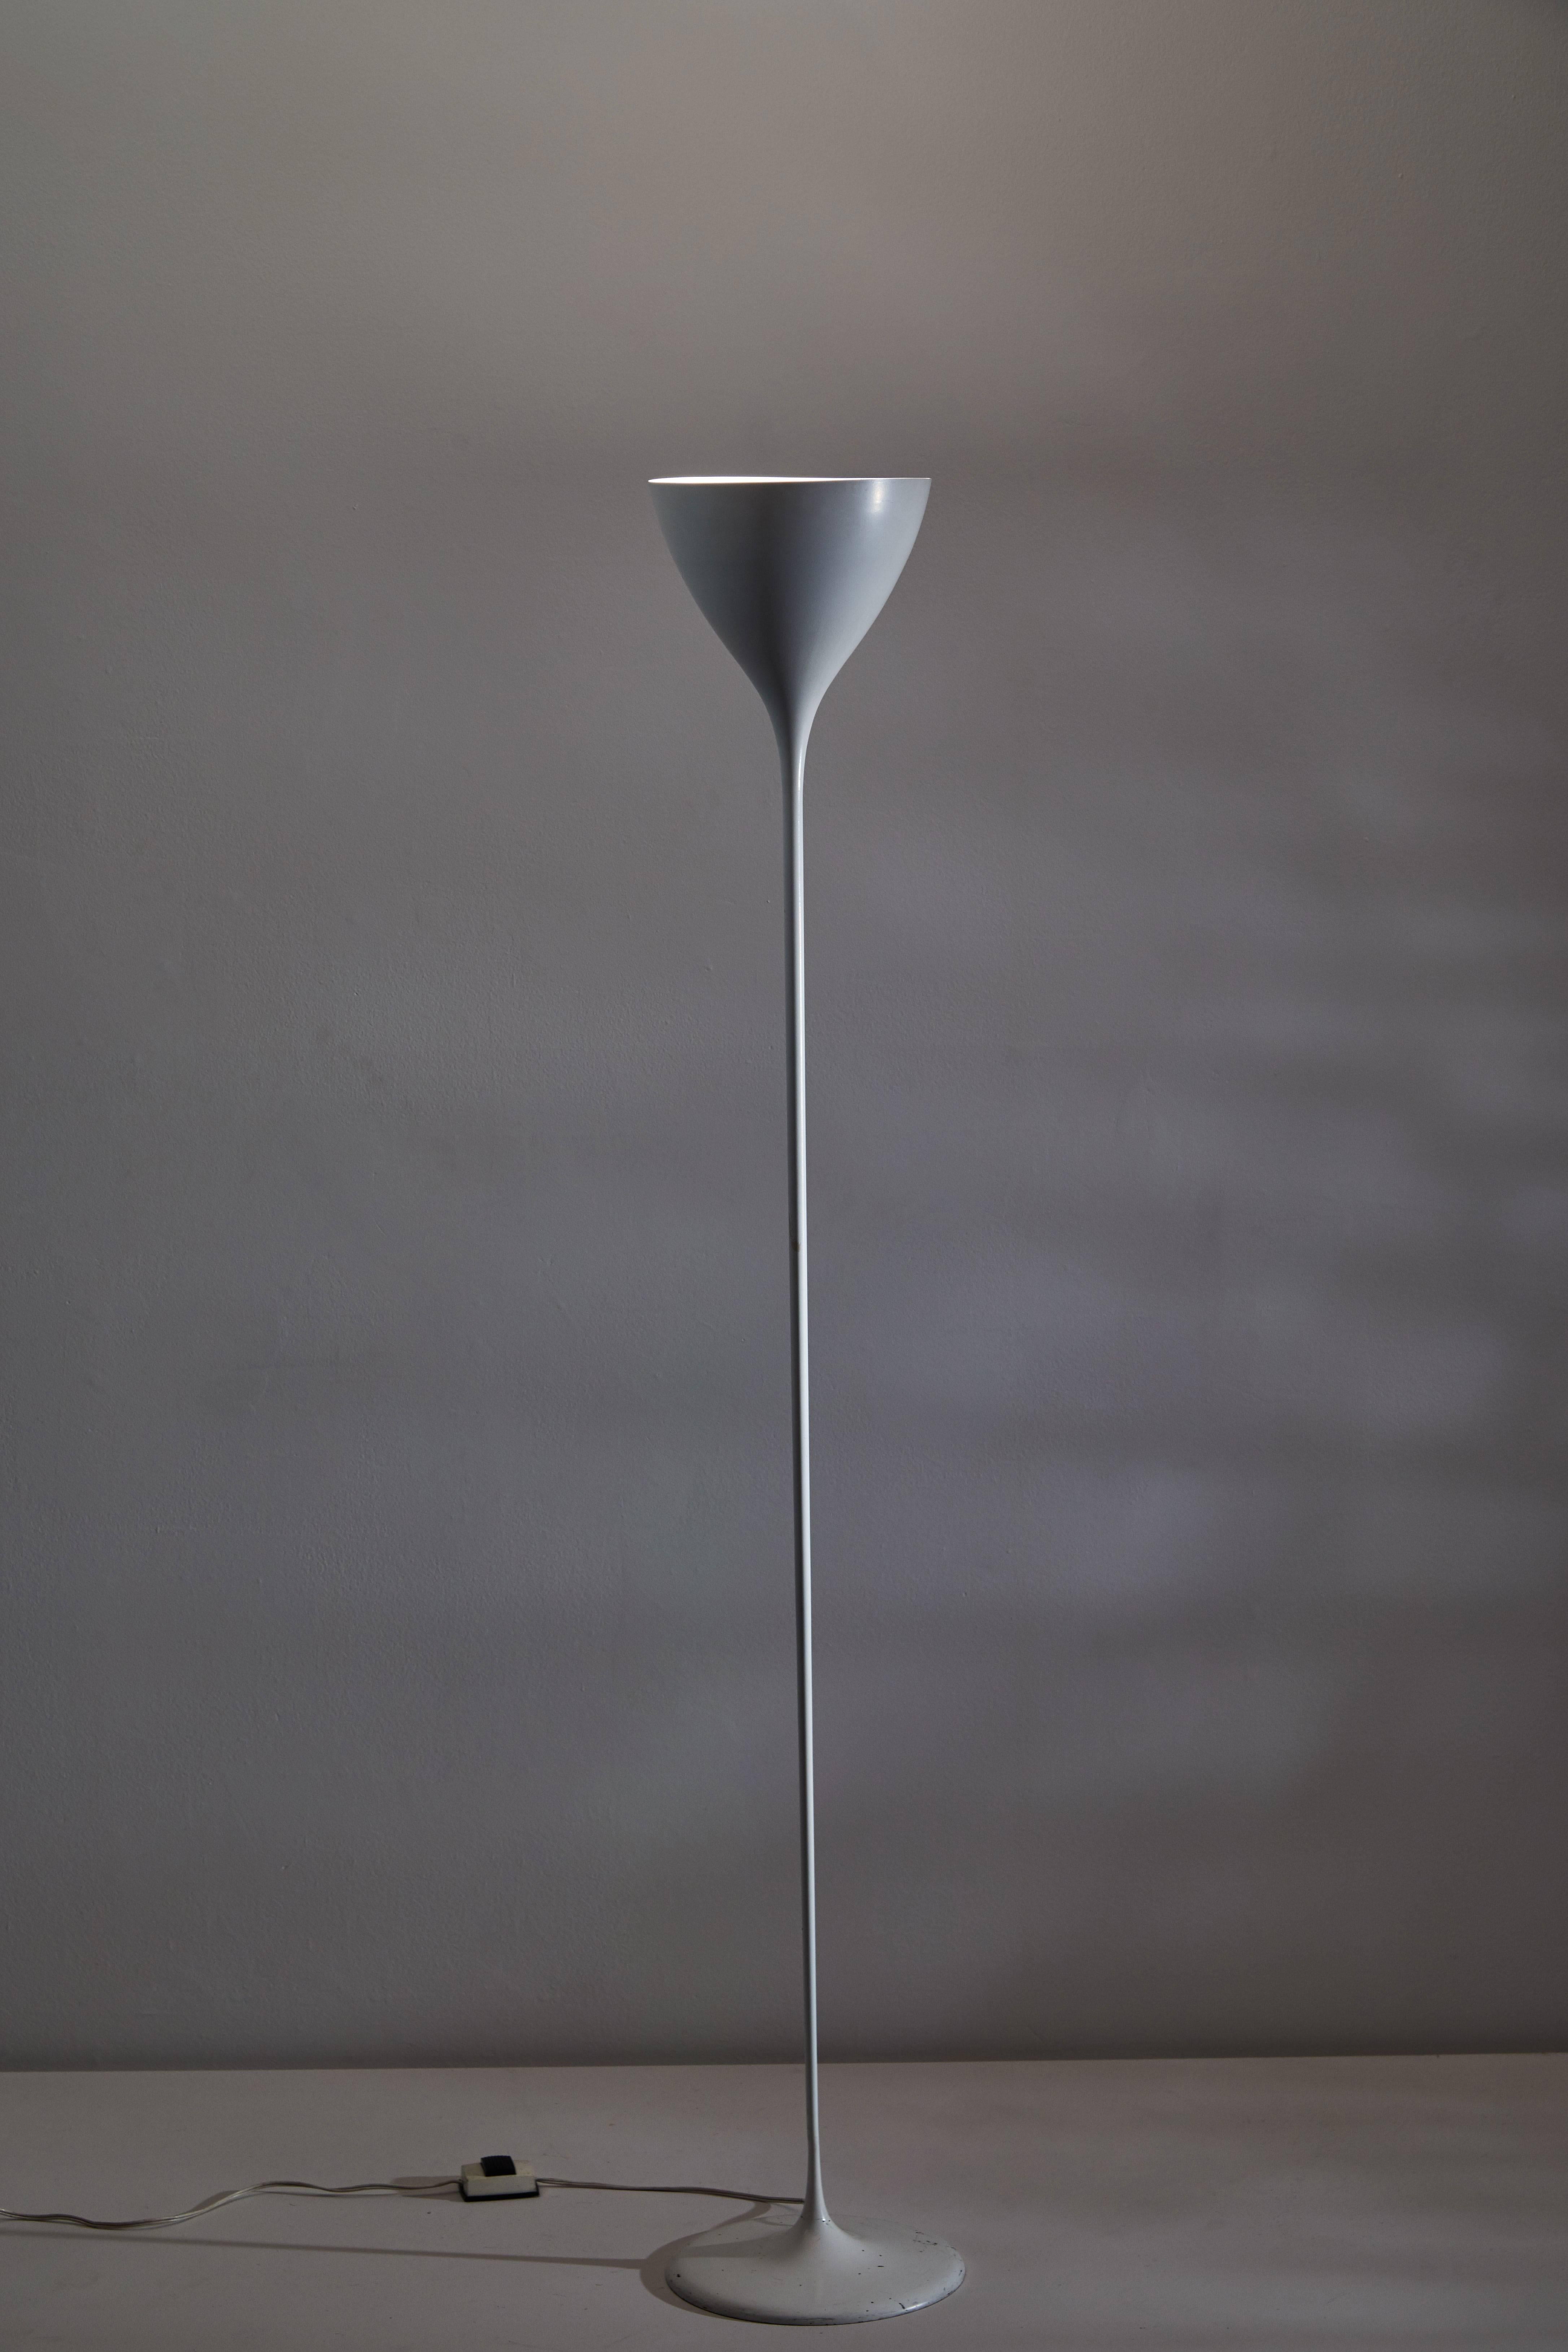 Torchiere floor Lamp by Max Bill designed in Switzerland, circa 1960s. White enameled metal. Original cord. Takes one 100w E27 maximum bulb.